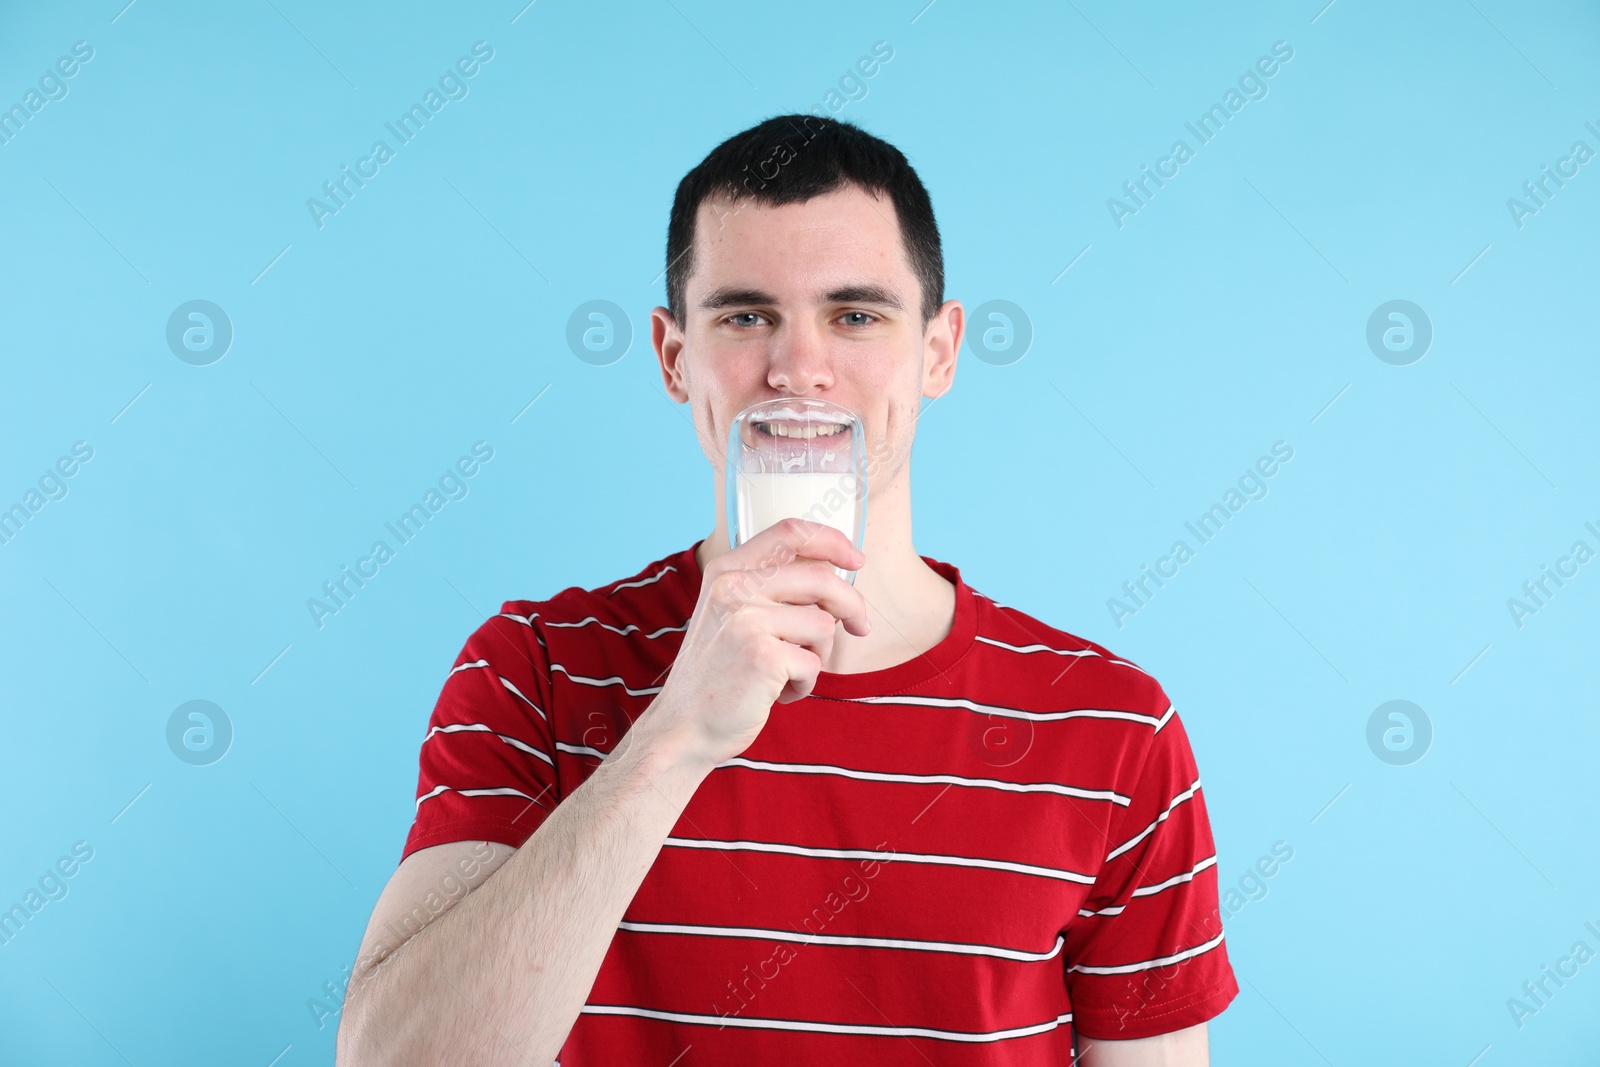 Photo of Milk mustache left after dairy product. Man drinking milk on light blue background